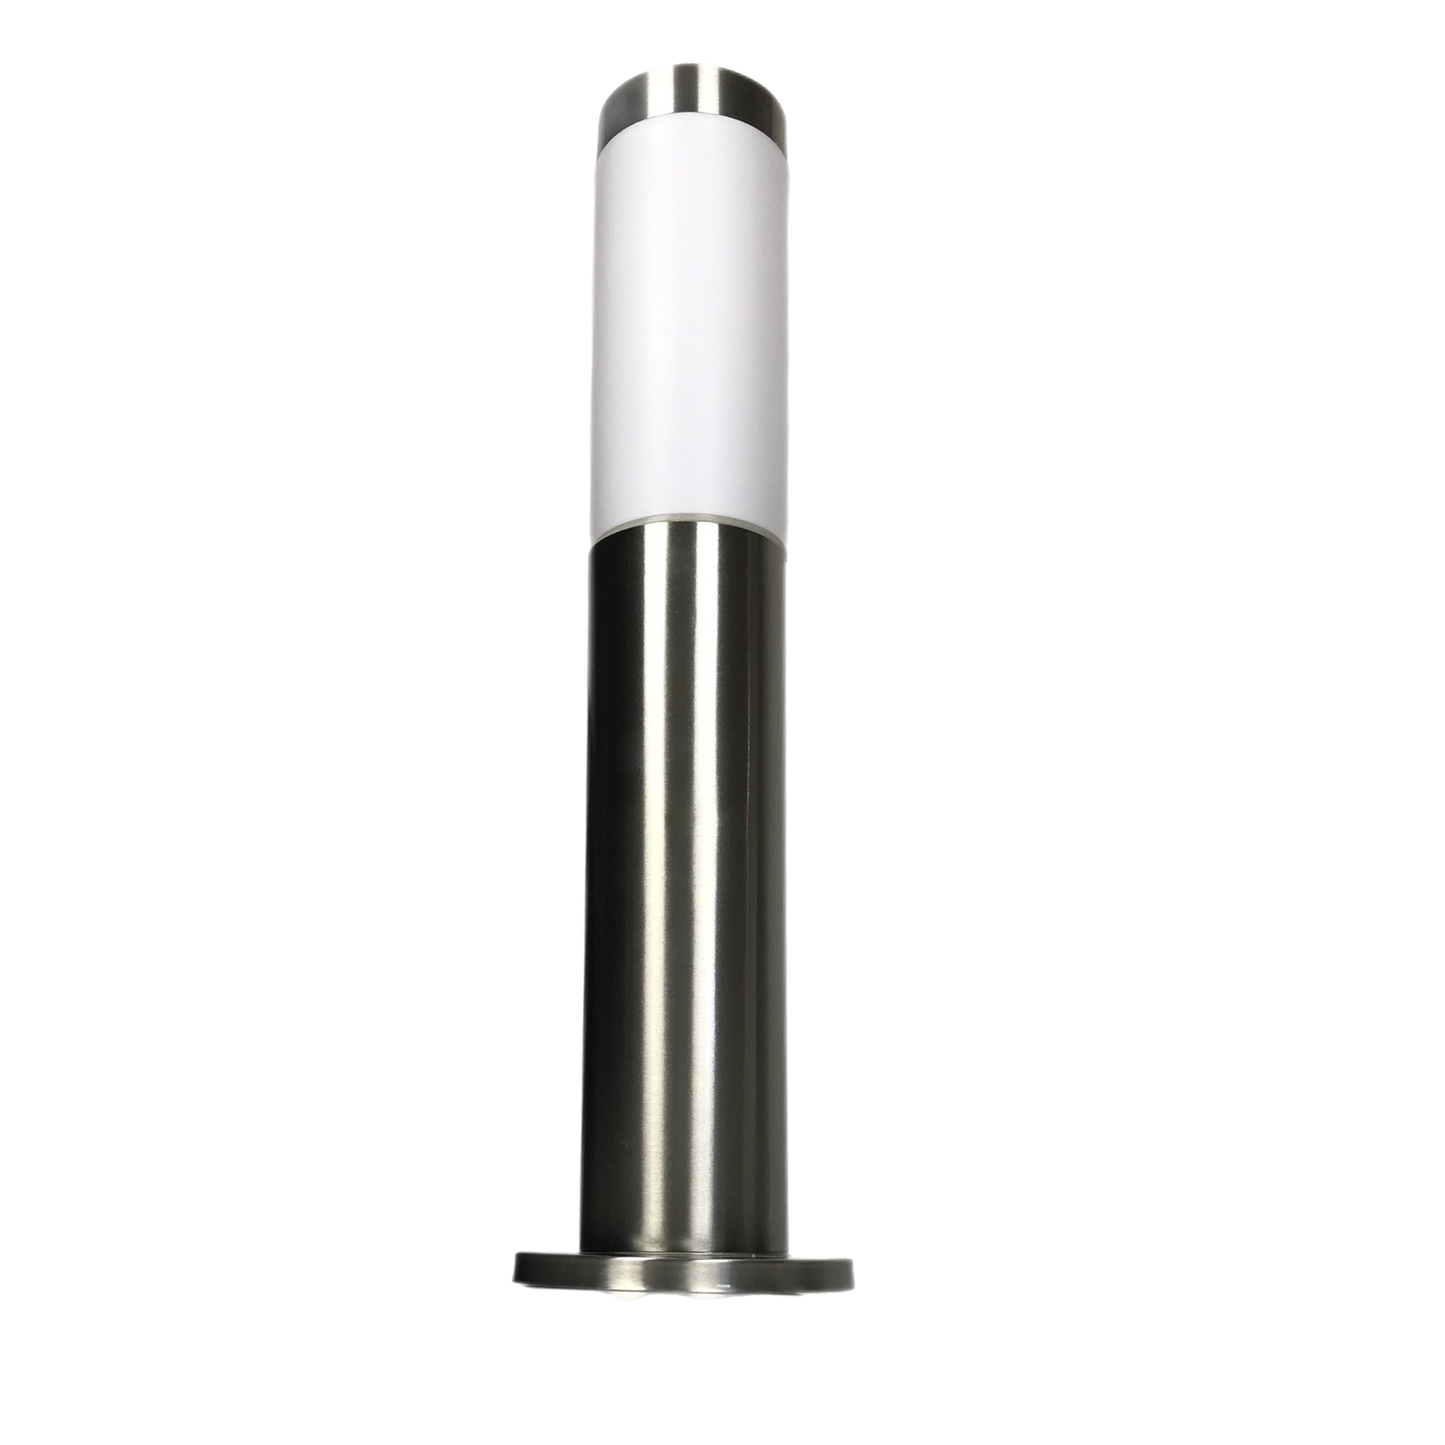 Our Aster 45 cm post light looks great in modern settings. The Aster post light has a simple round design and its stainless steel is complemented by an opal polycarbonate diffuser. This post light is perfect for any outdoor space wanting light and security such as gardens, driveways, workspaces, pubs and hotels.